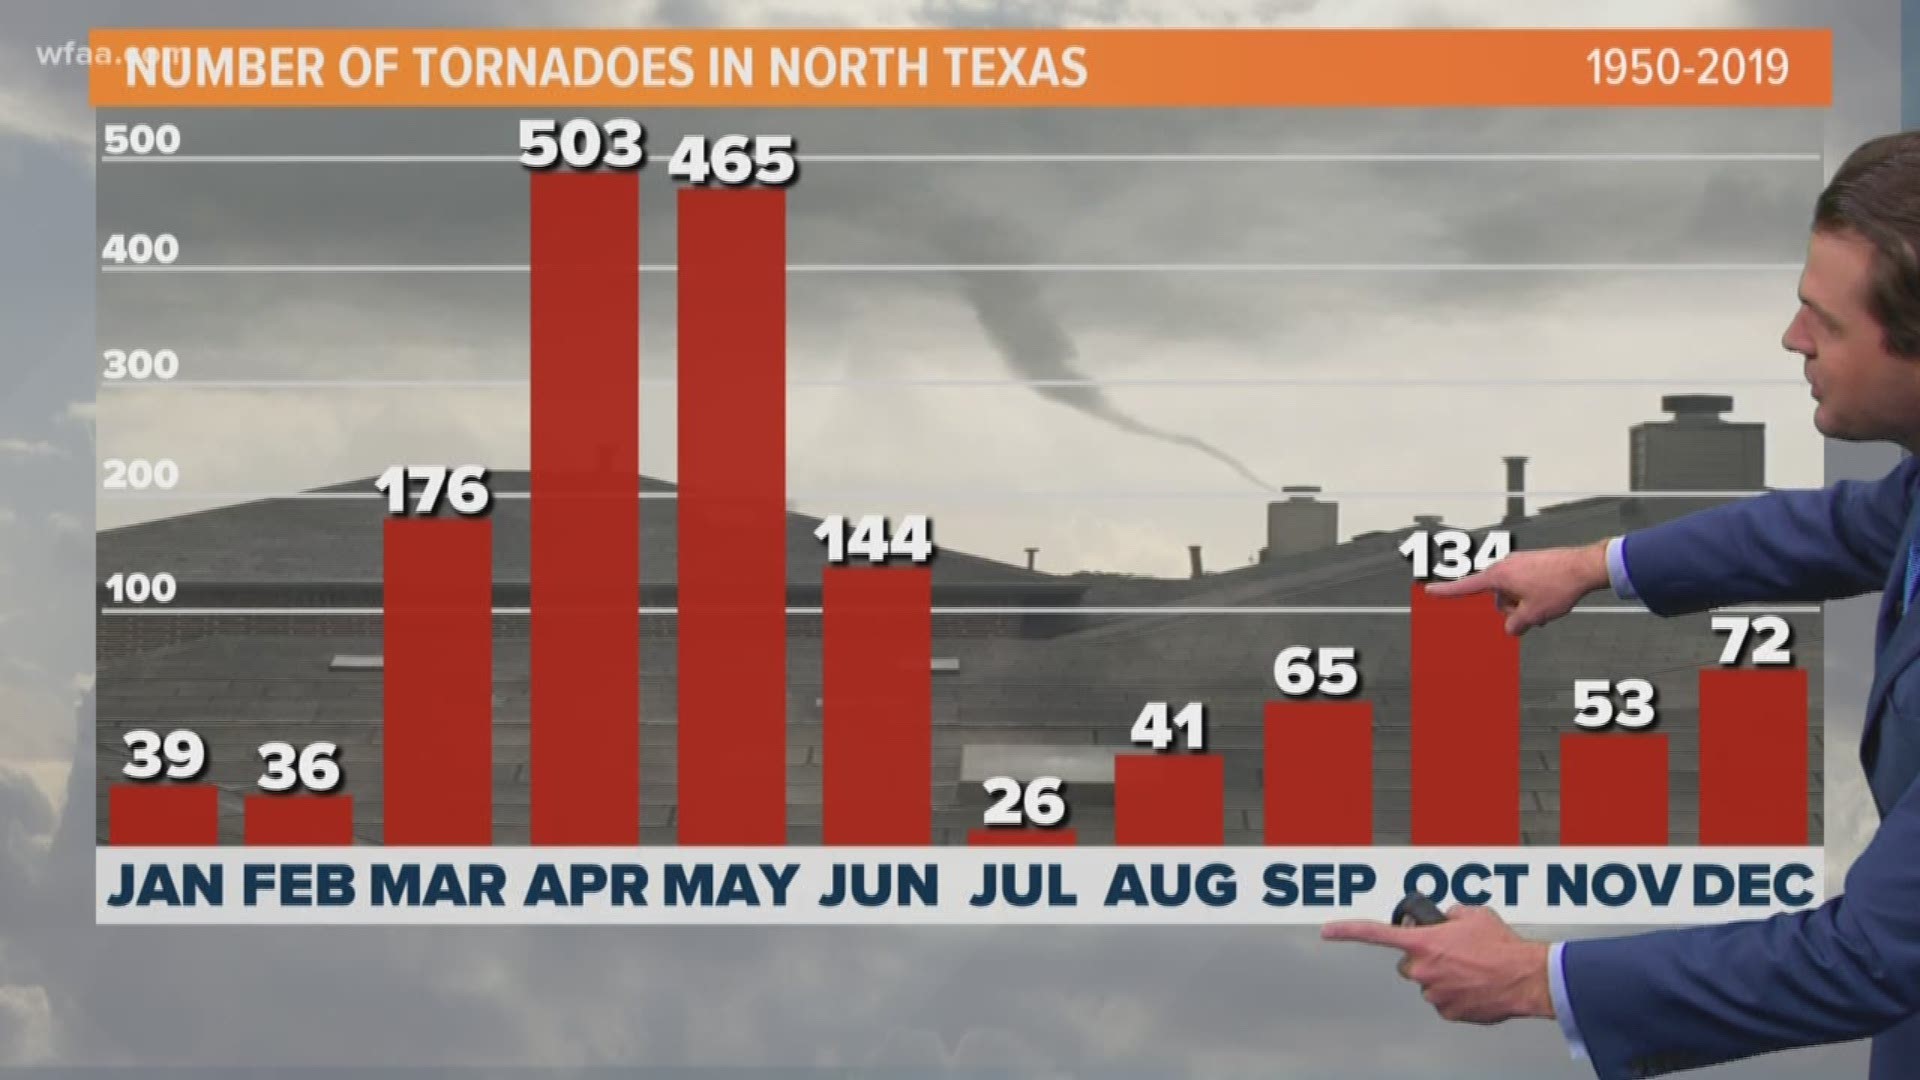 Other than March thru June, October has the most tornadoes of any of the remaining months. This is what we call our "second severe weather season."